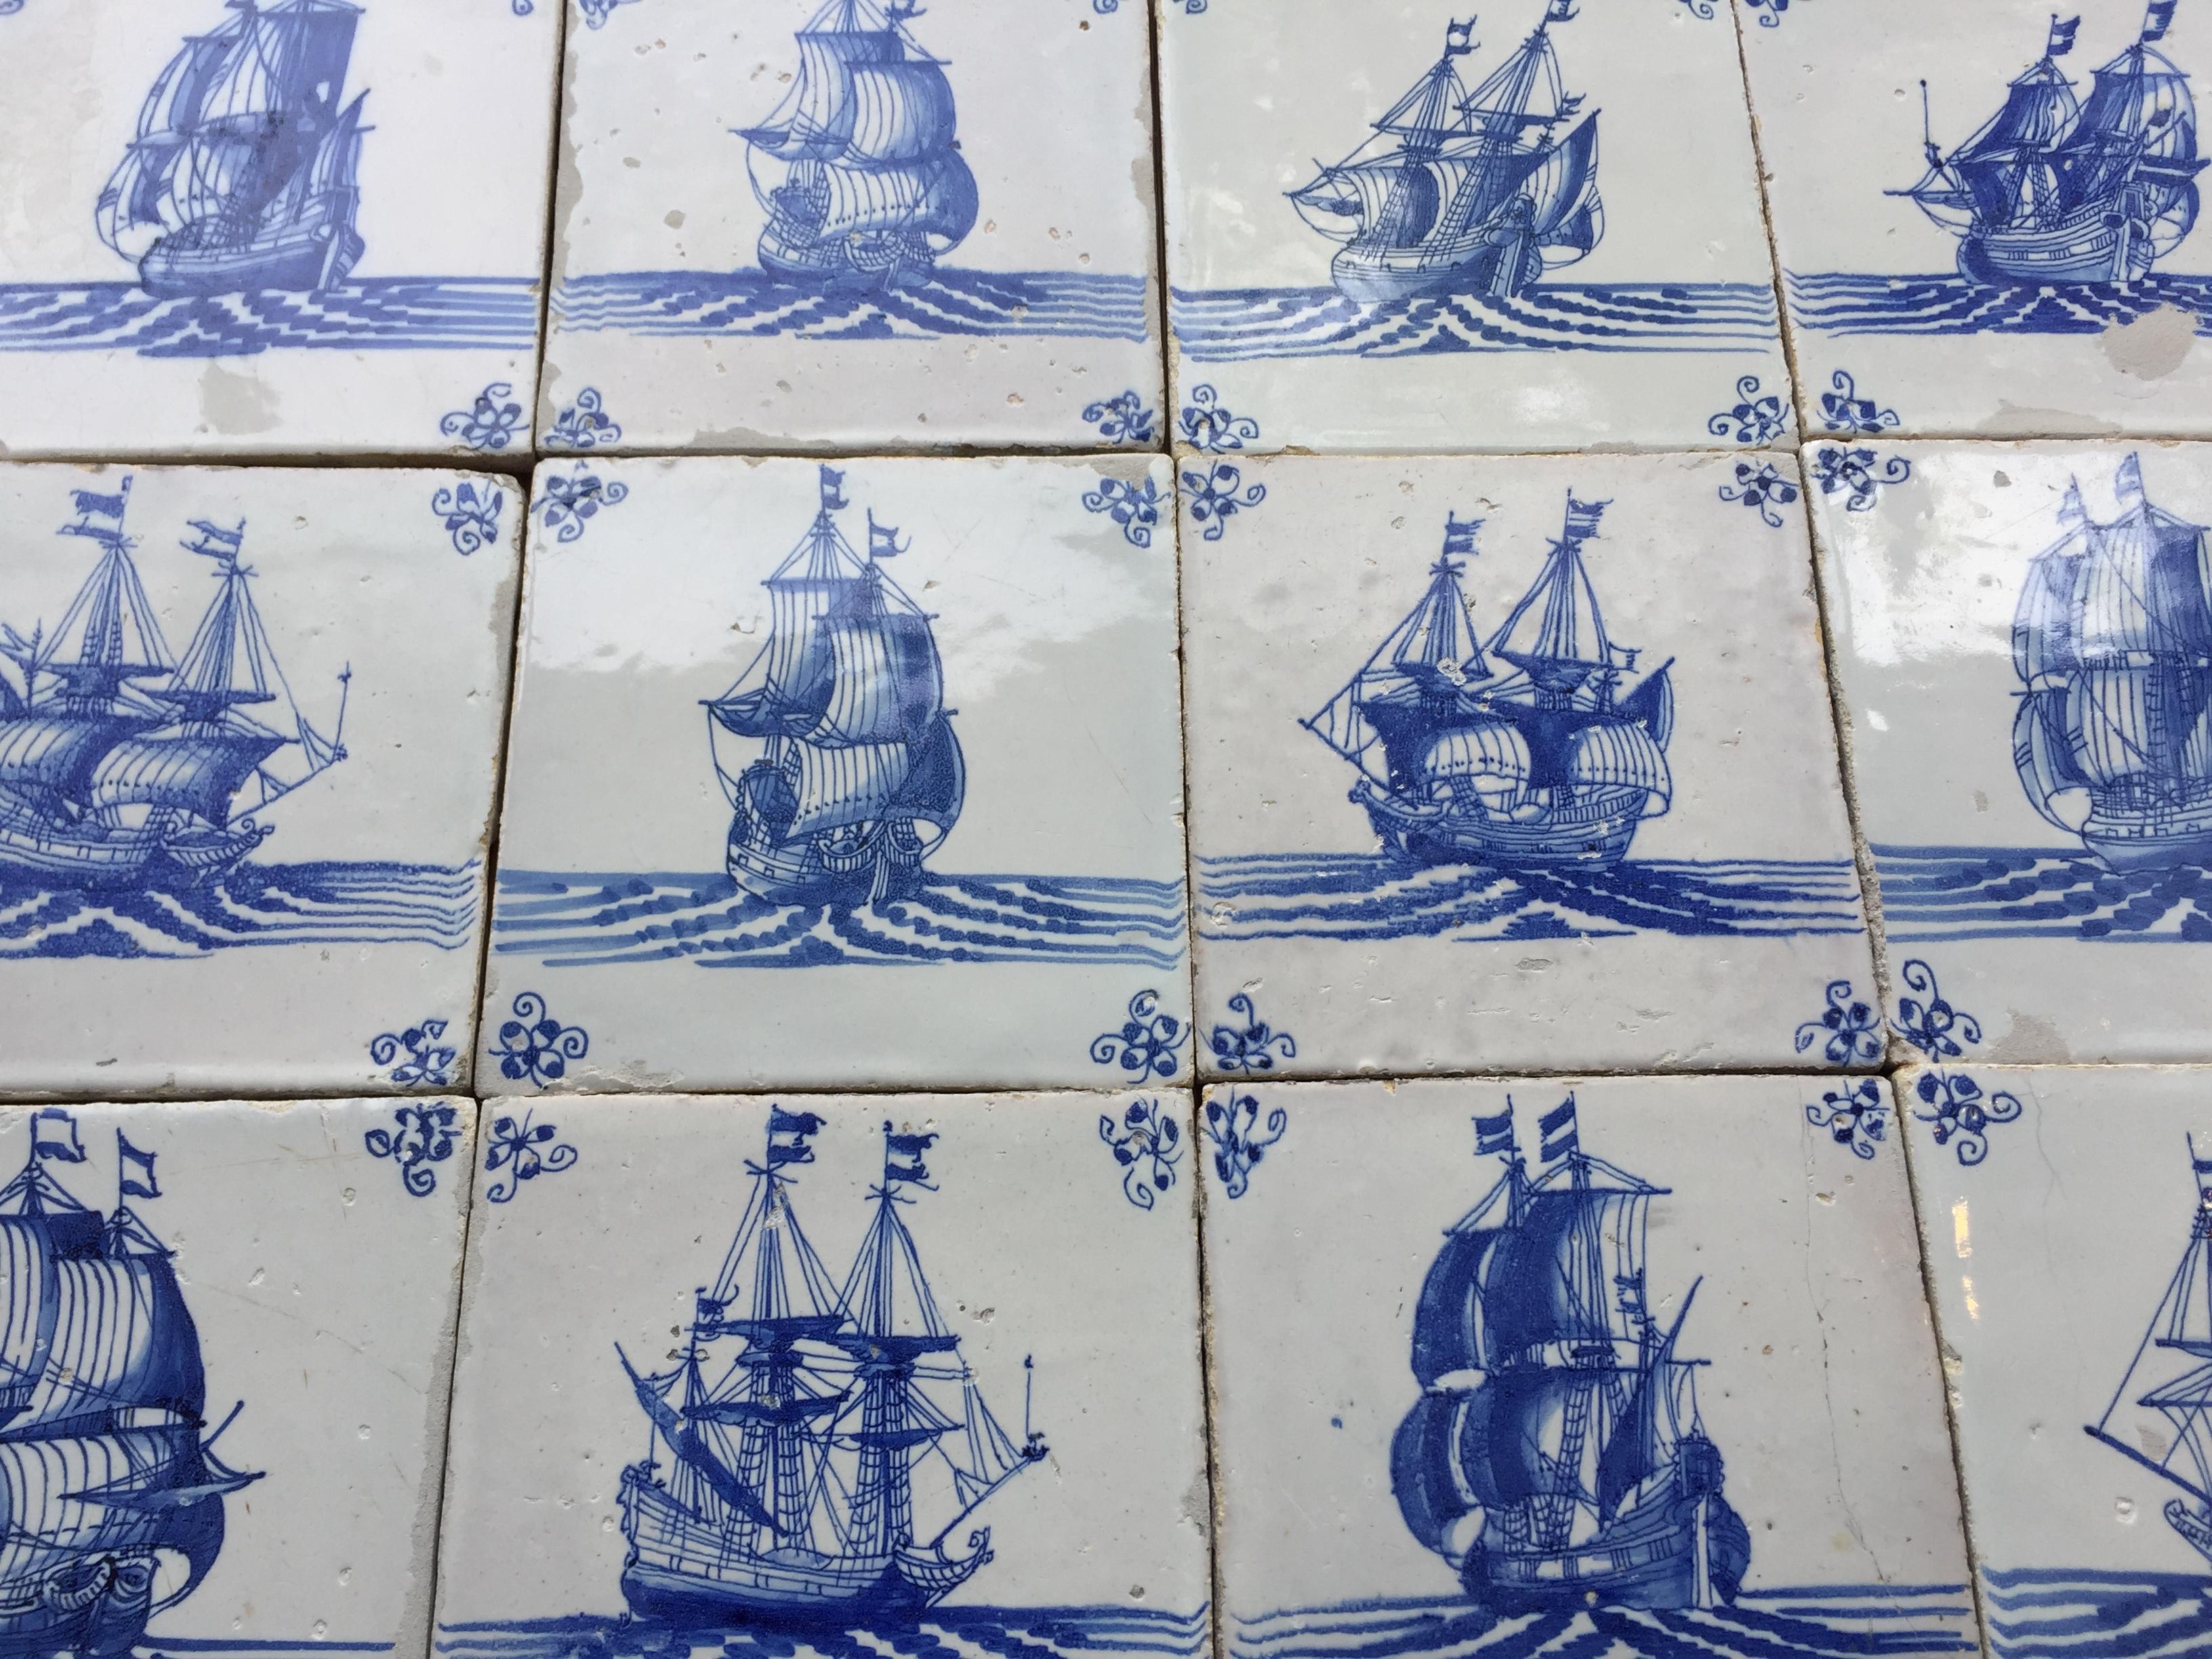 Glazed Rare Set of 12 Blue and White Dutch Delft Tiles with Ships